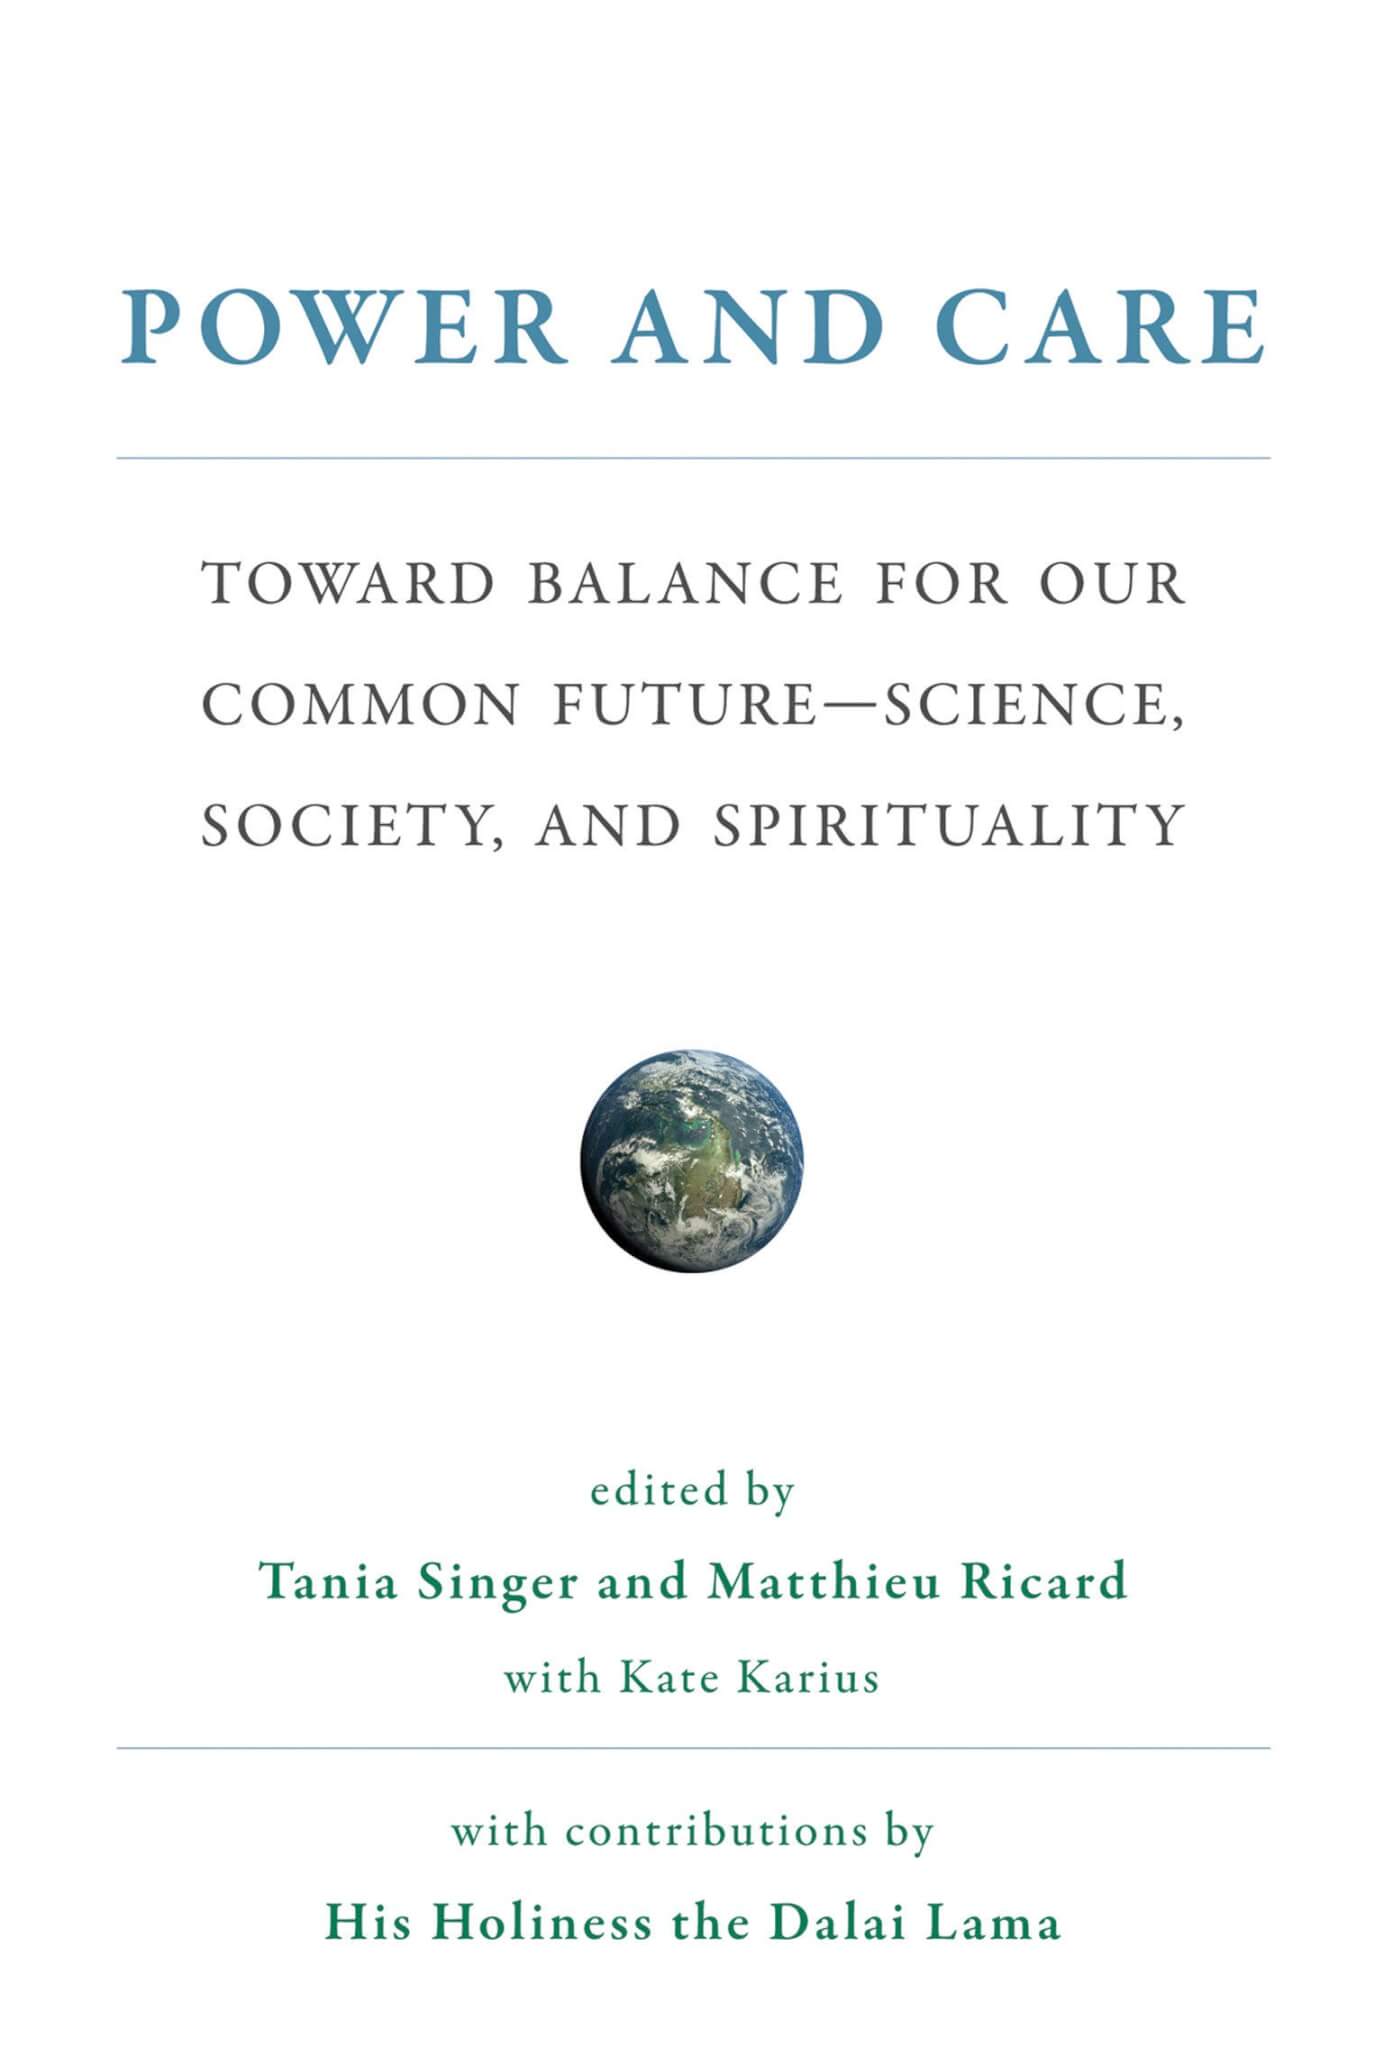 Power and Care: Toward Balance for our common future – Science, society, and spirituality